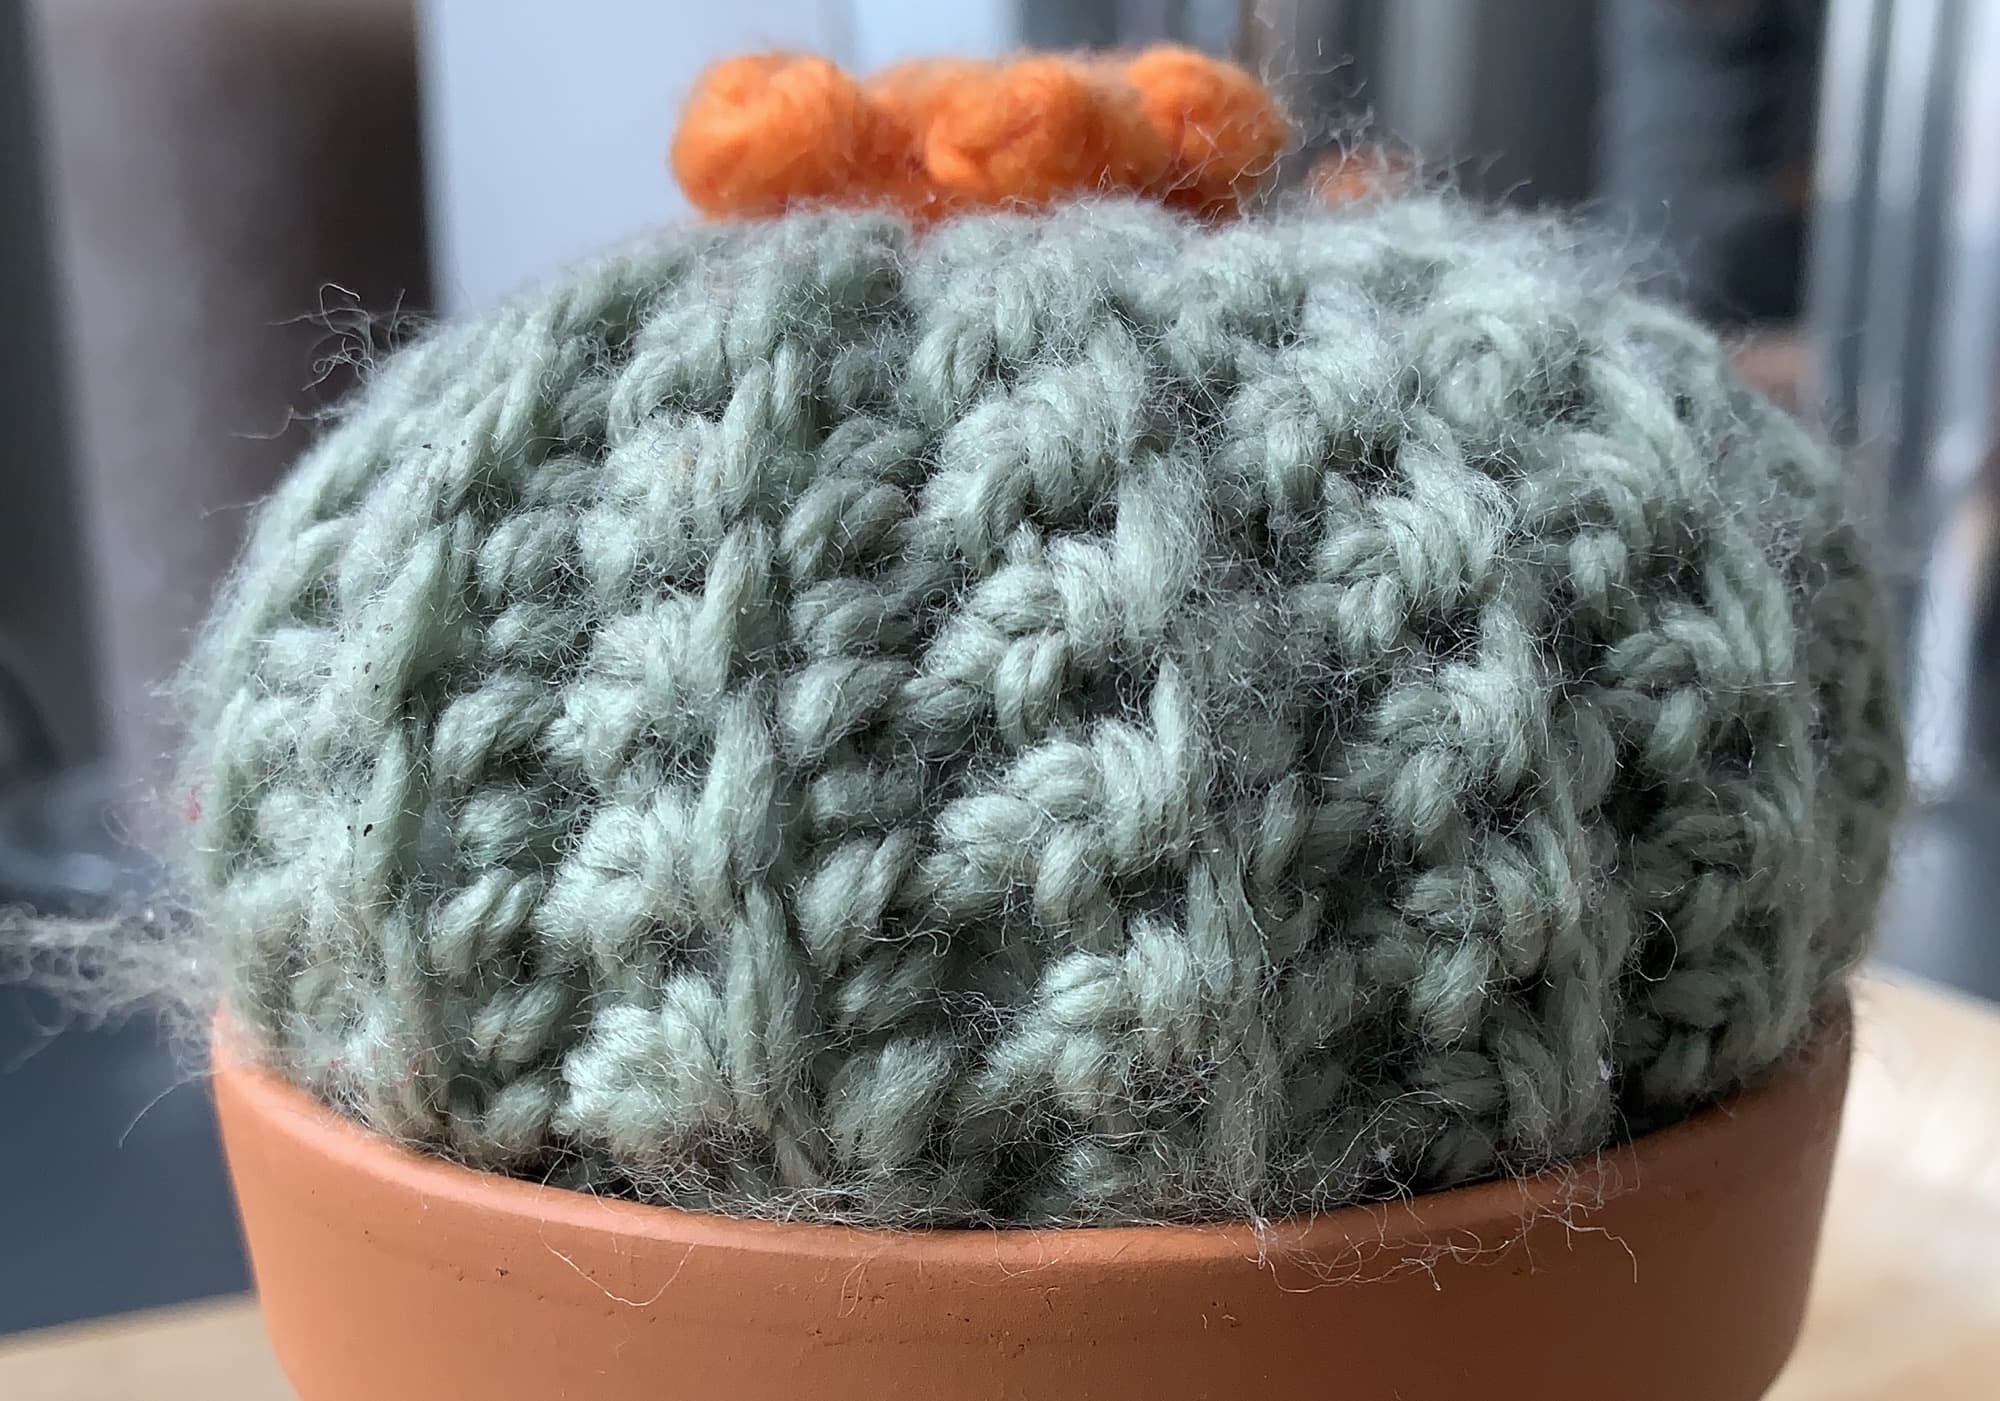 A crocheted cactus.